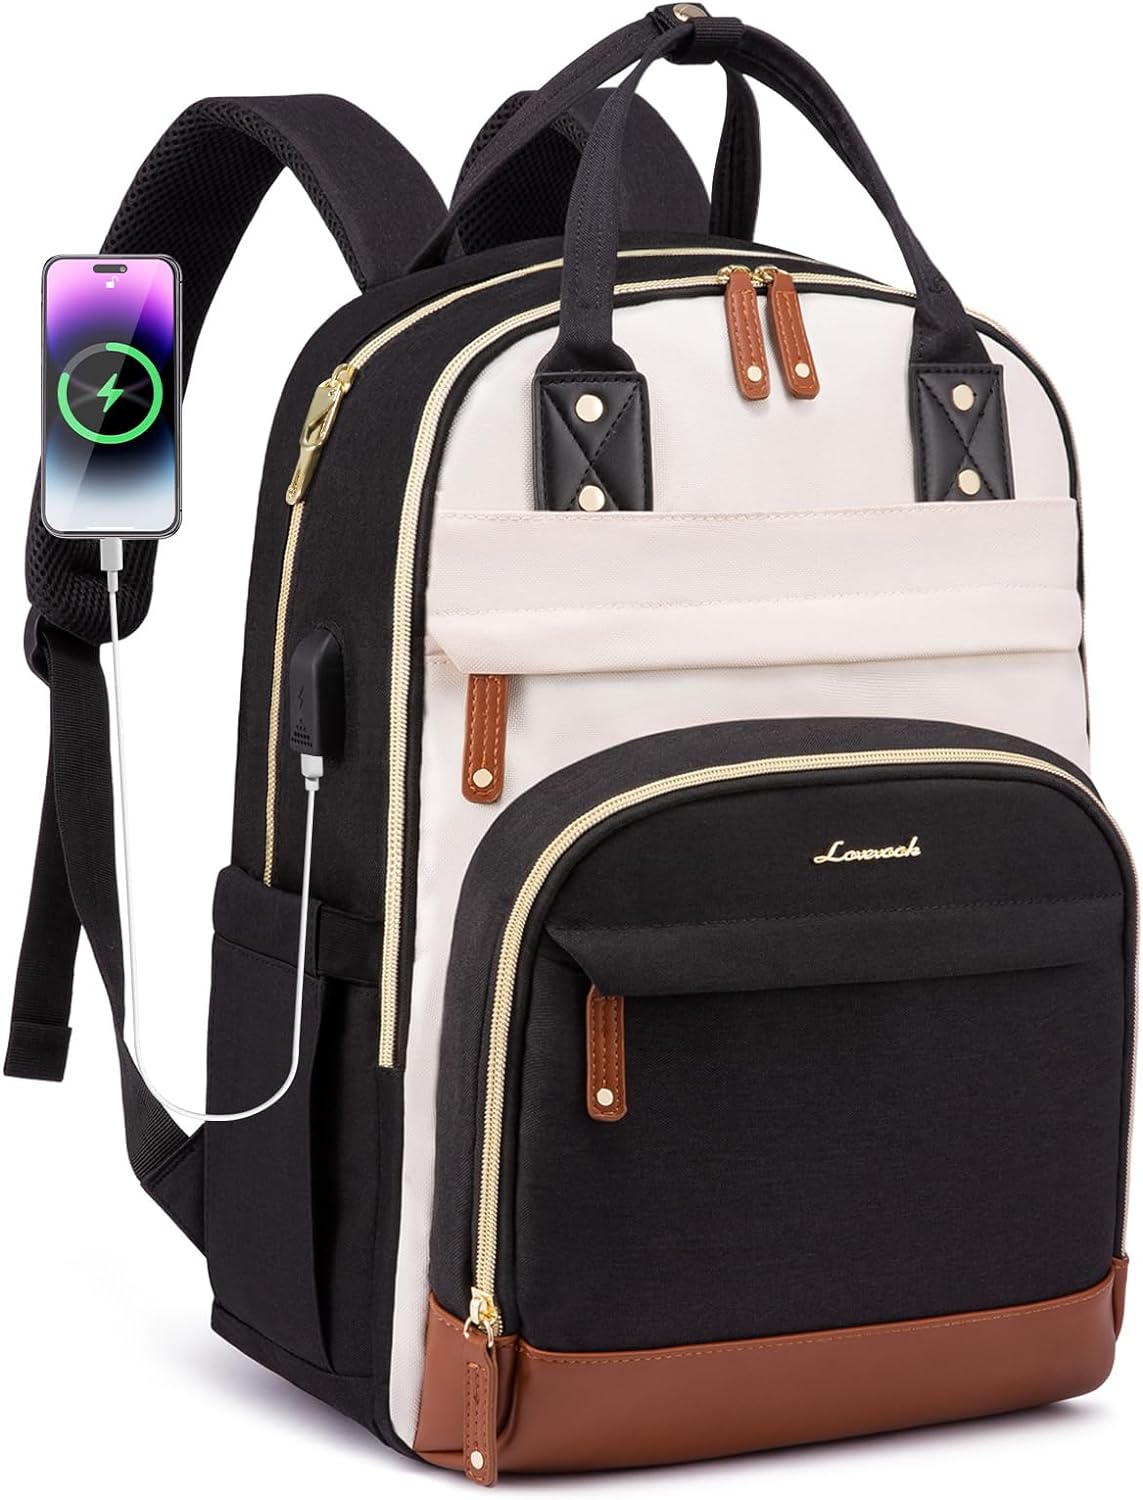 Limited-Time Promo: LOVEVOOK Backpack for Women - Save 10% and Get Exclusive Discount!